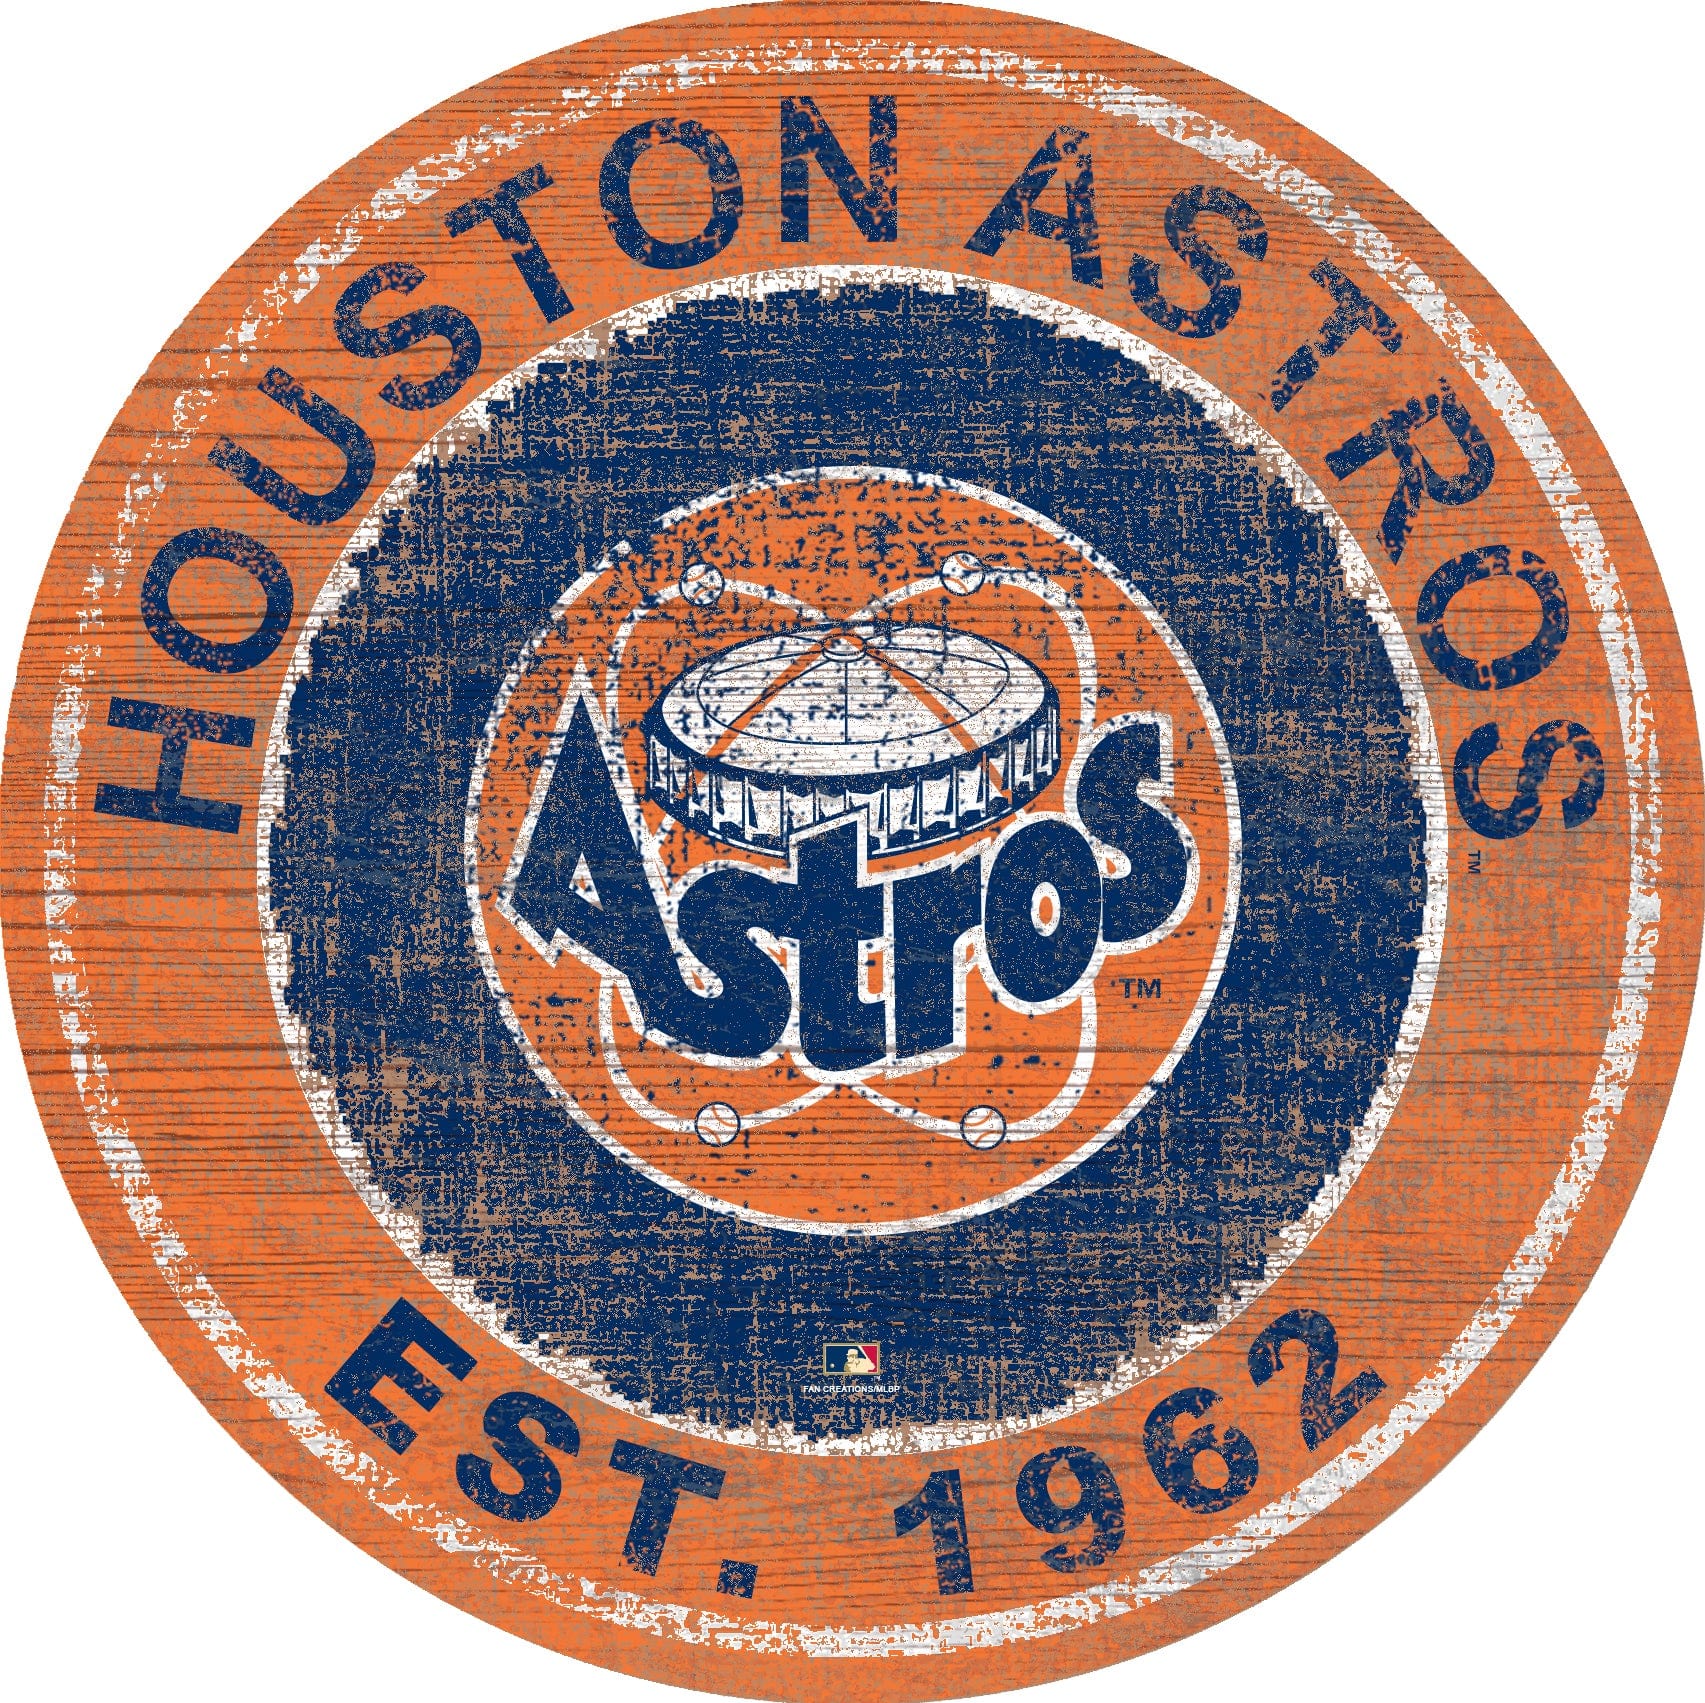 OFFICIAL RULES: Houston Astros Space City jersey and souvenir giveaway